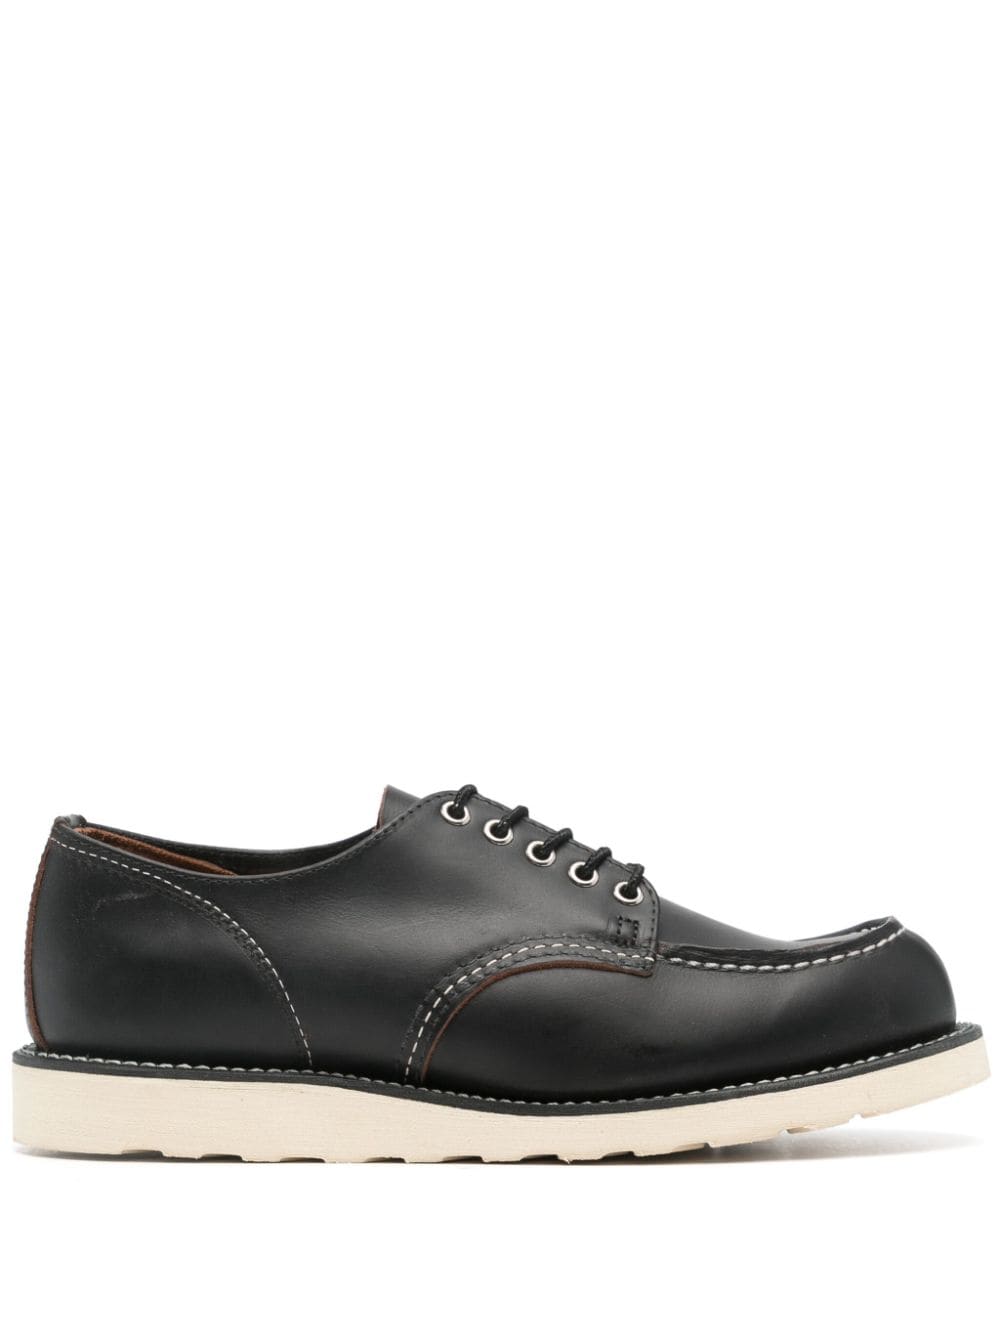 RED WING SHOES RED WING SHOES- Moc Oxford Leather Brogues